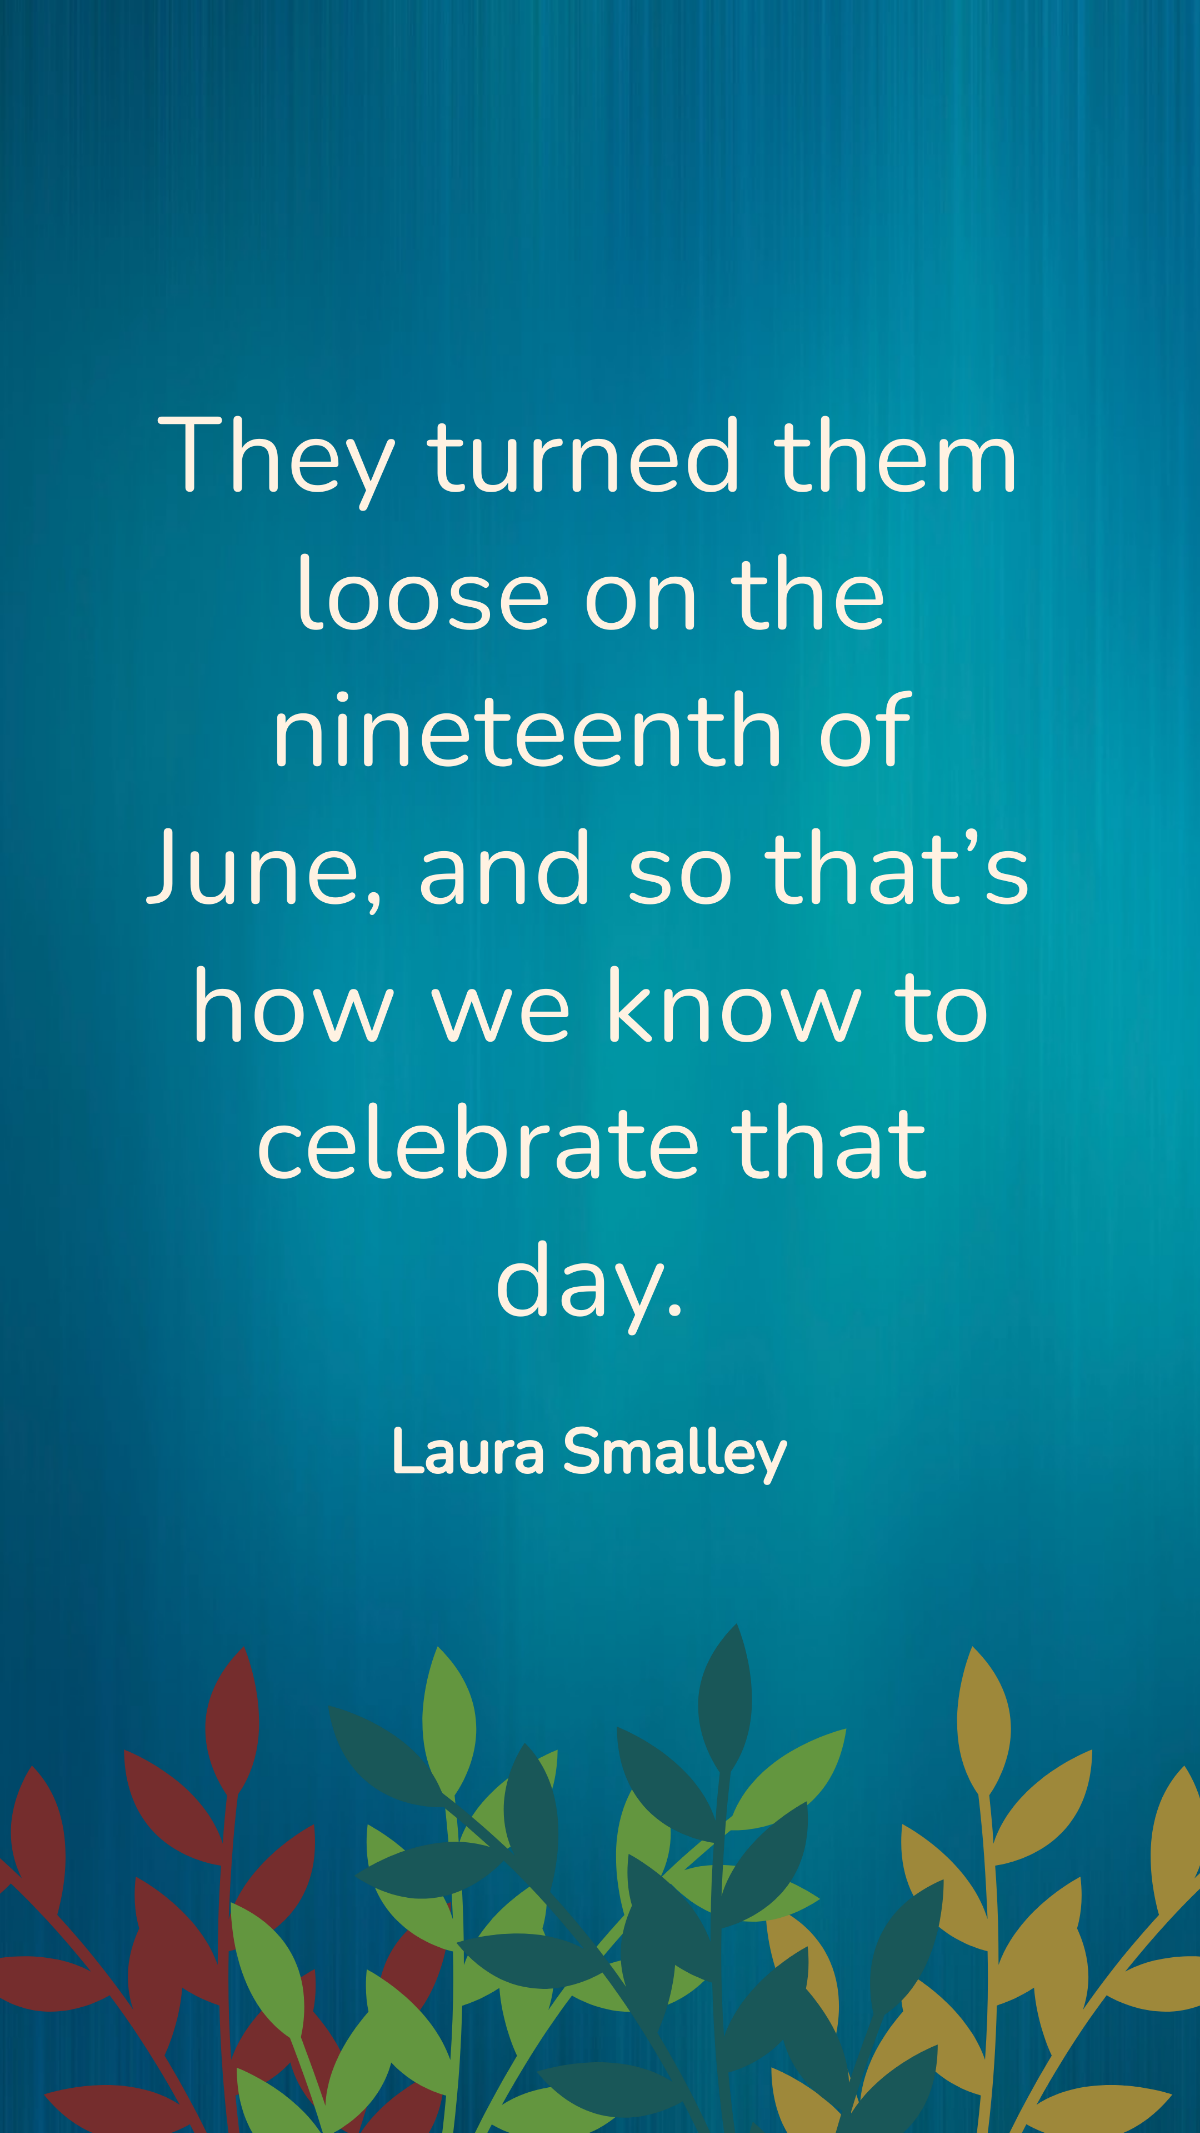 Laura Smalley - They turned them loose on the nineteenth of June, and so that’s how we know to celebrate that day. Template